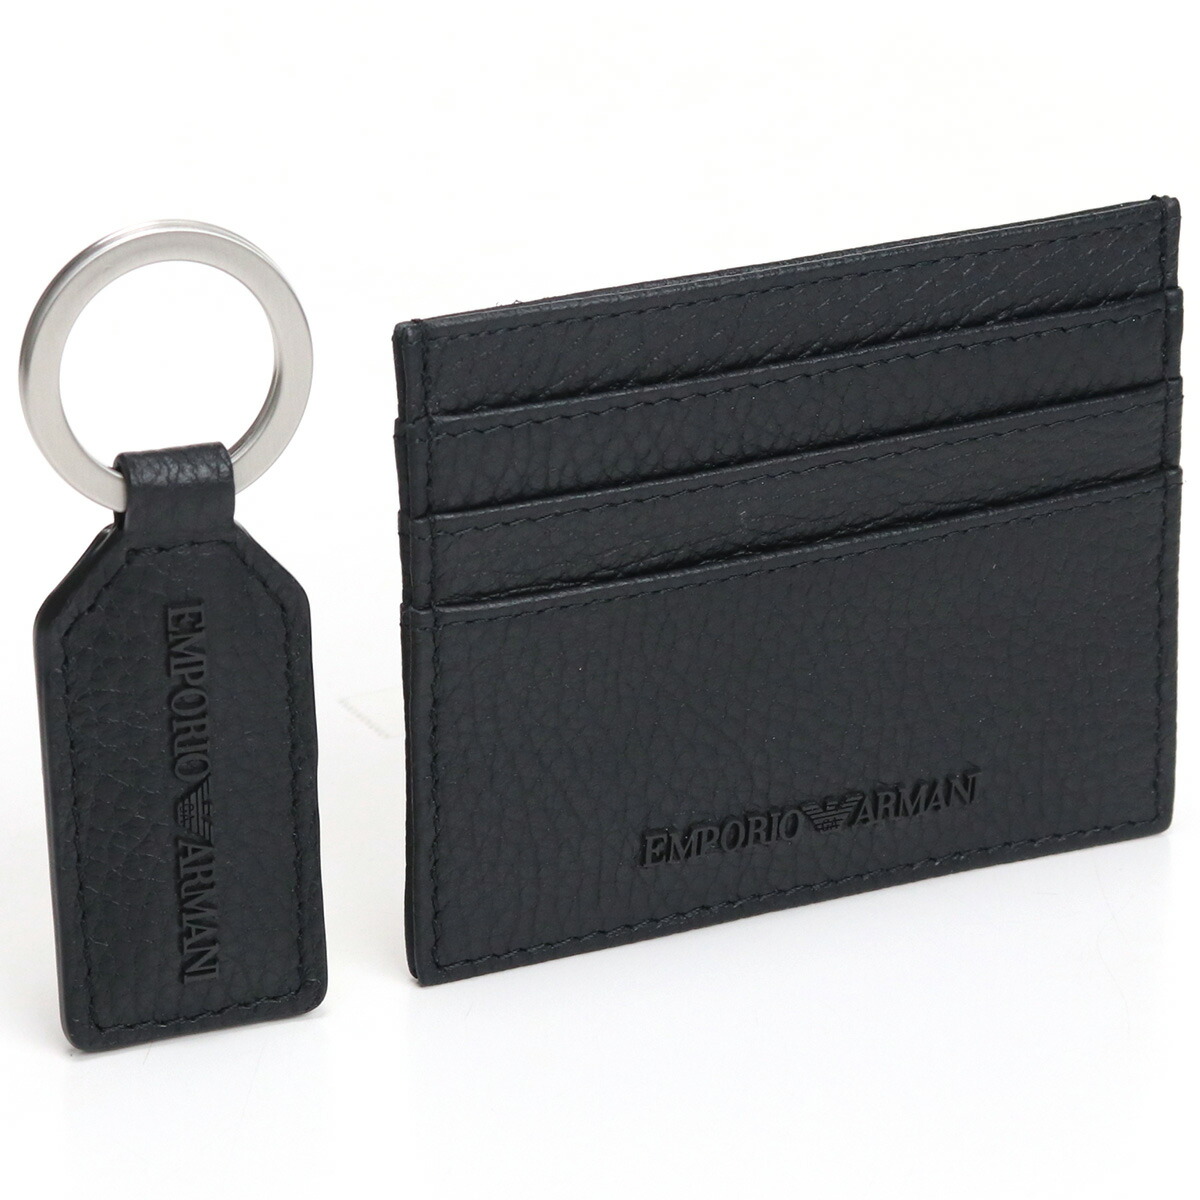 Armerie Boutique エンポリオアルマーニ EMPORIO ARMANI カードケース キーリング ギフトセット Y4R382  Y068E 80001 BLACK ブラック gsm-6